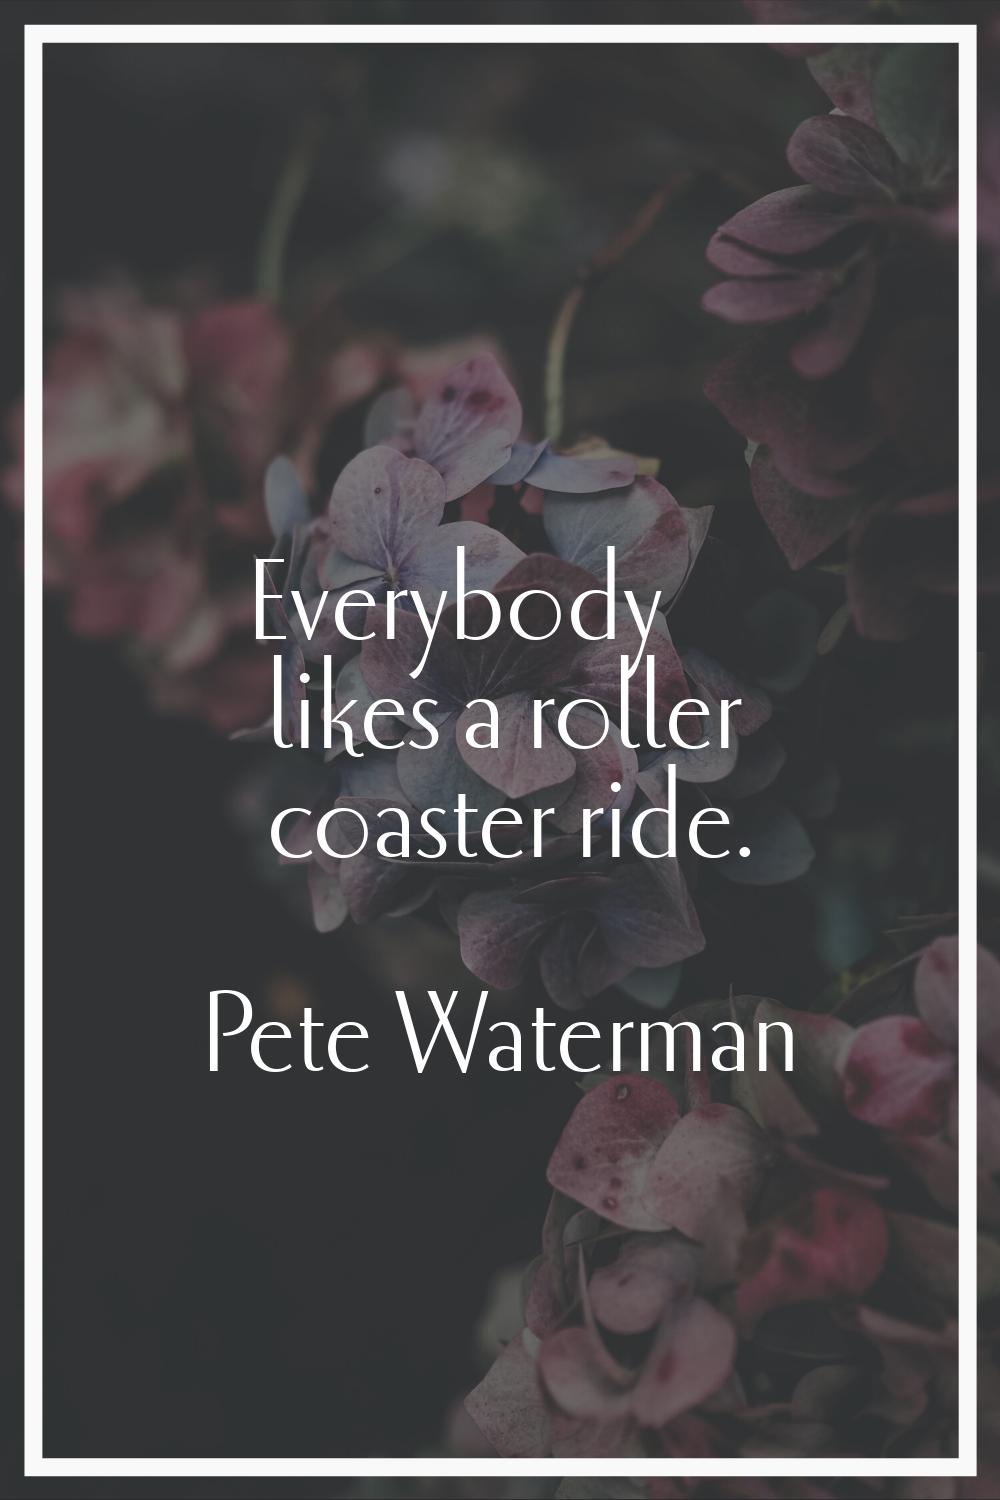 Everybody likes a roller coaster ride.